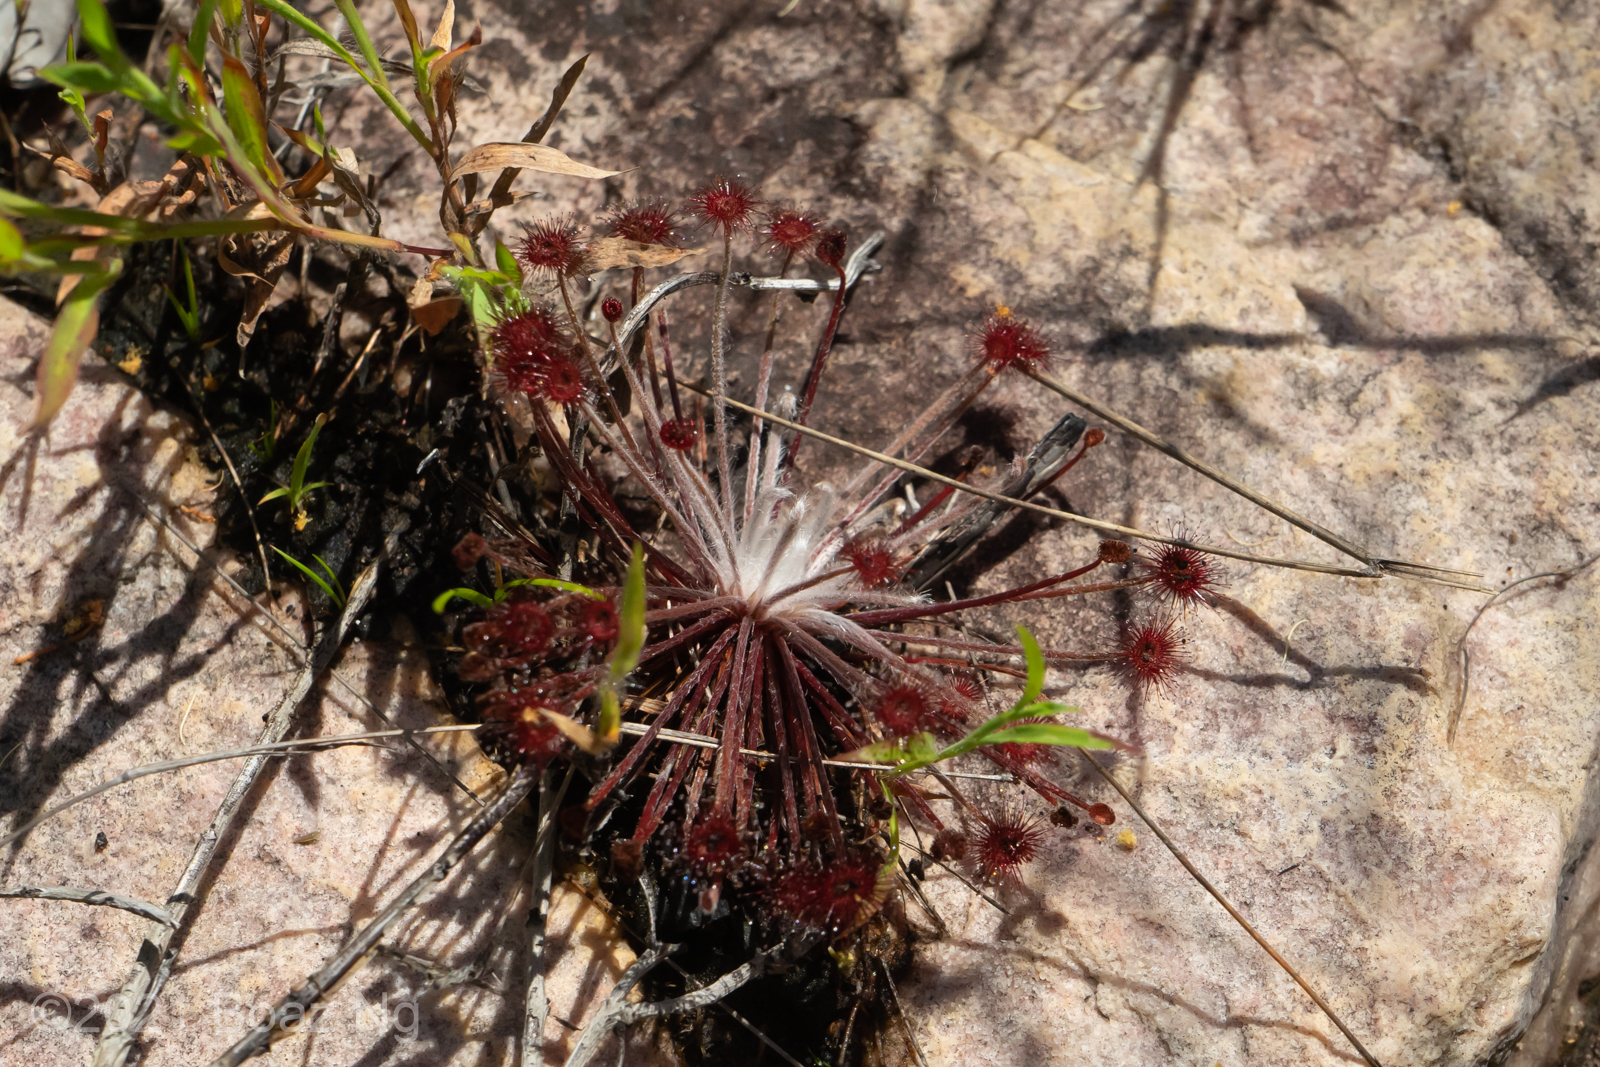 The Drosera petiolaris species complex in the Northern Territory